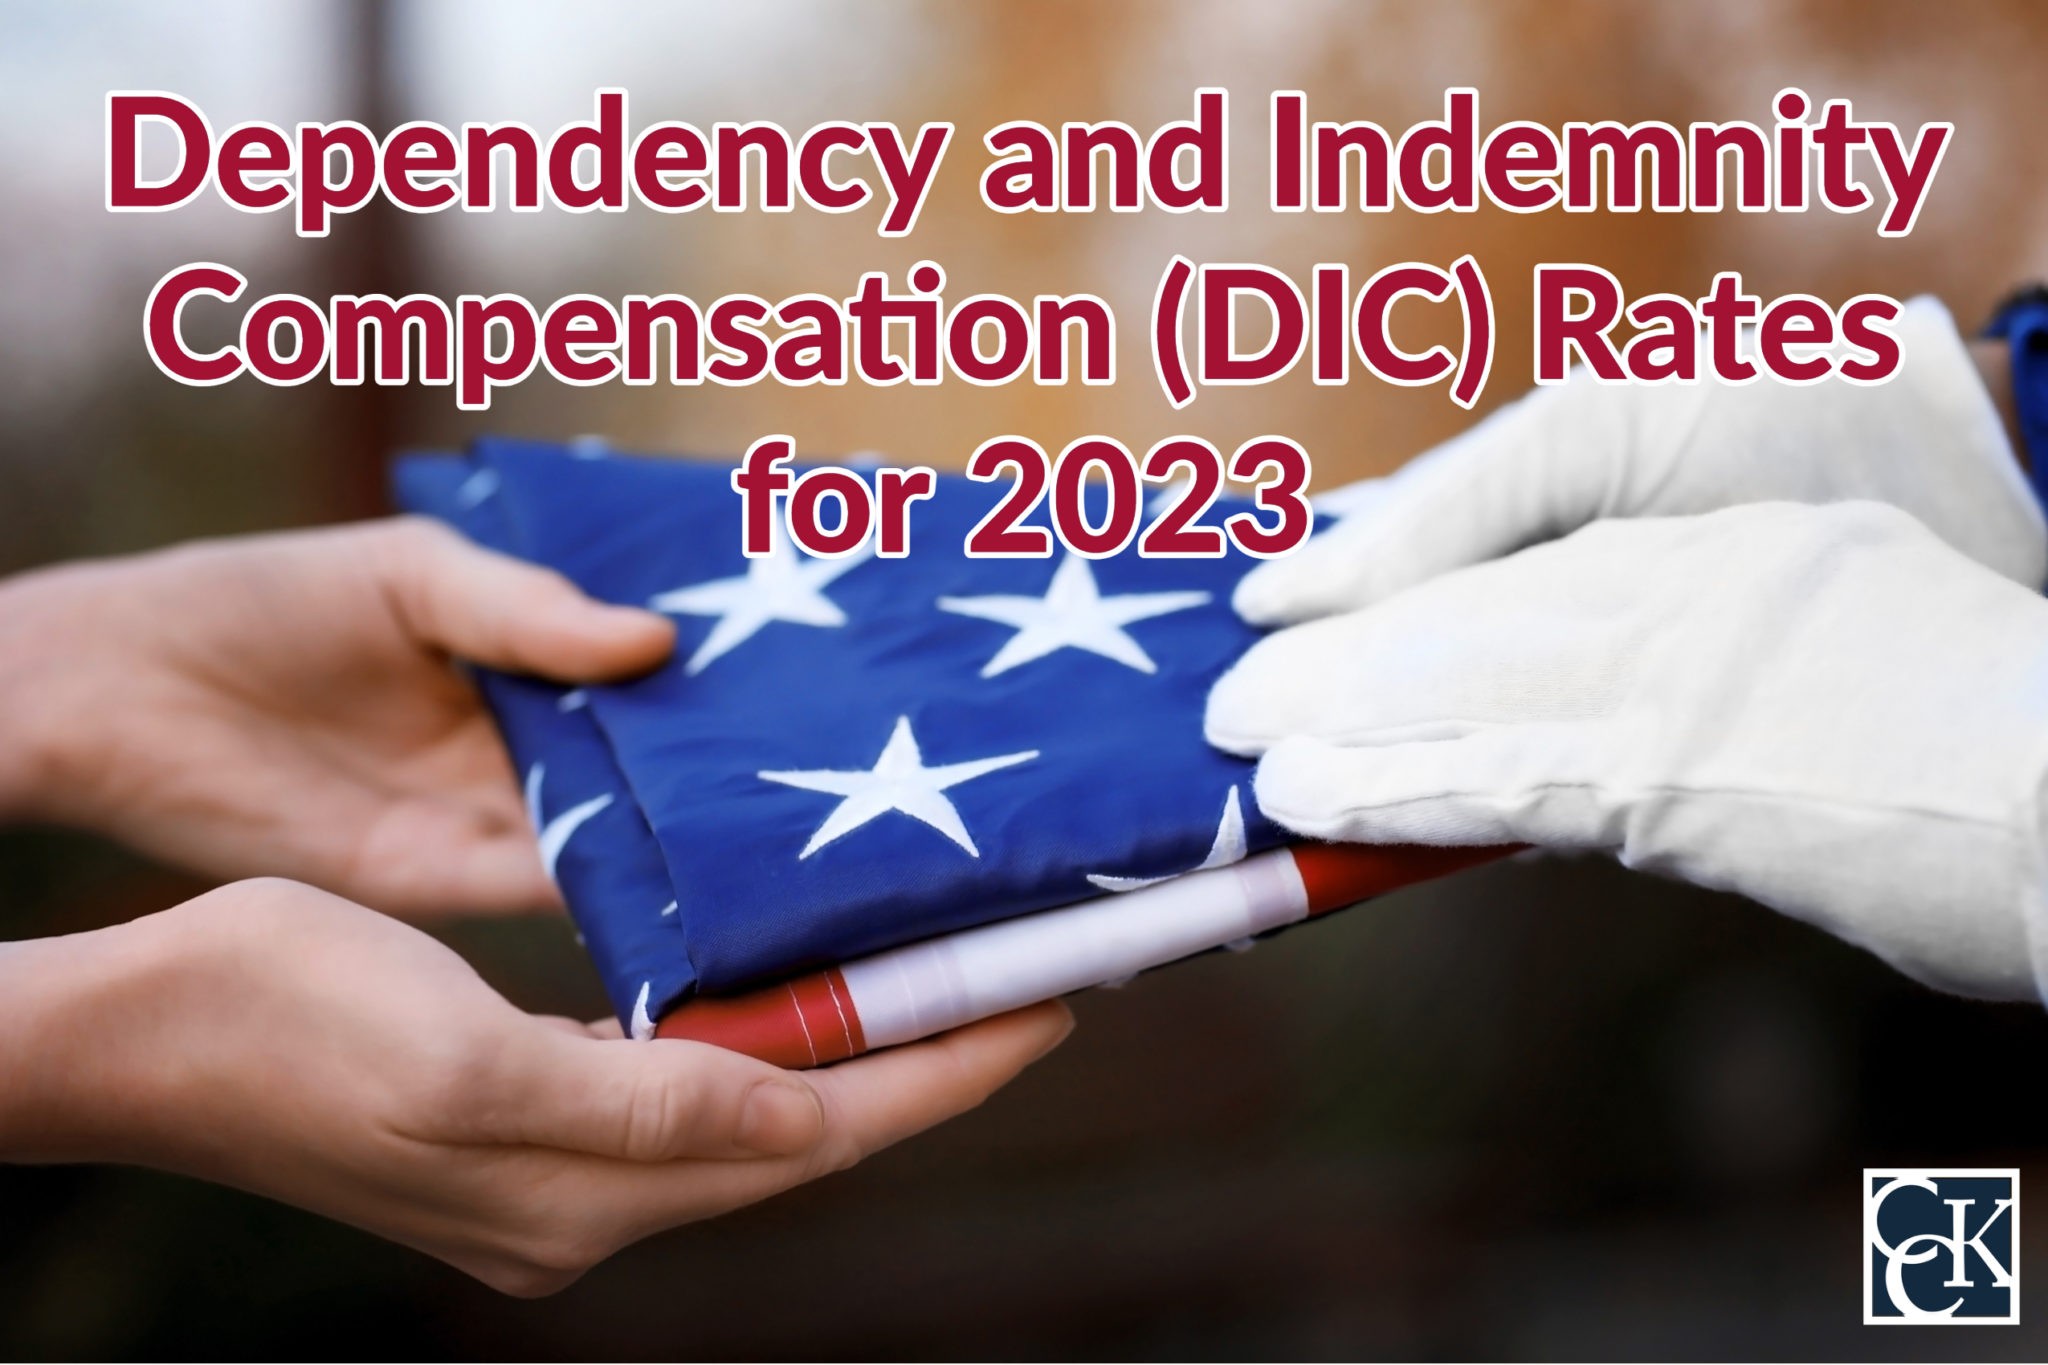 VA Dependency & Indemnity (DIC) Rates for 2023 CCK Law